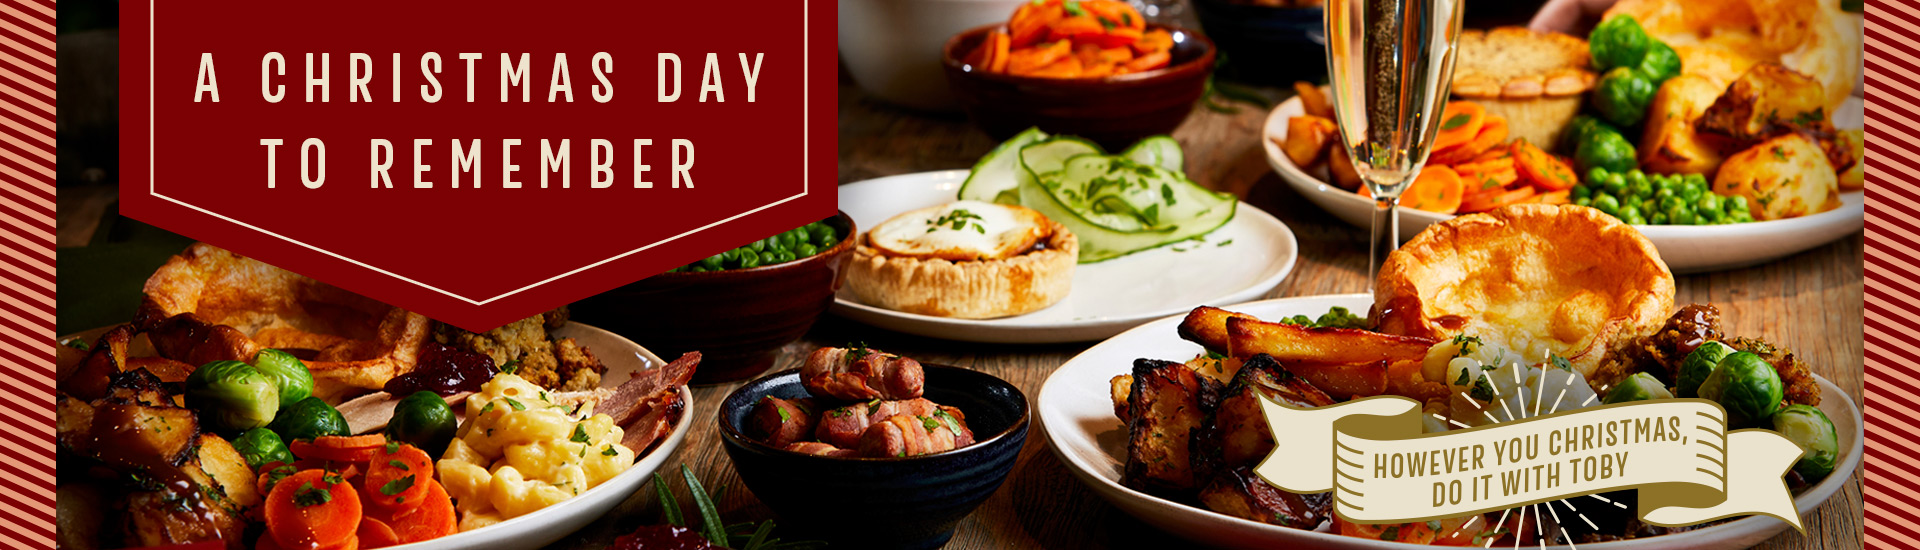 Christmas Day menu at Toby Carvery Clacton On Sea